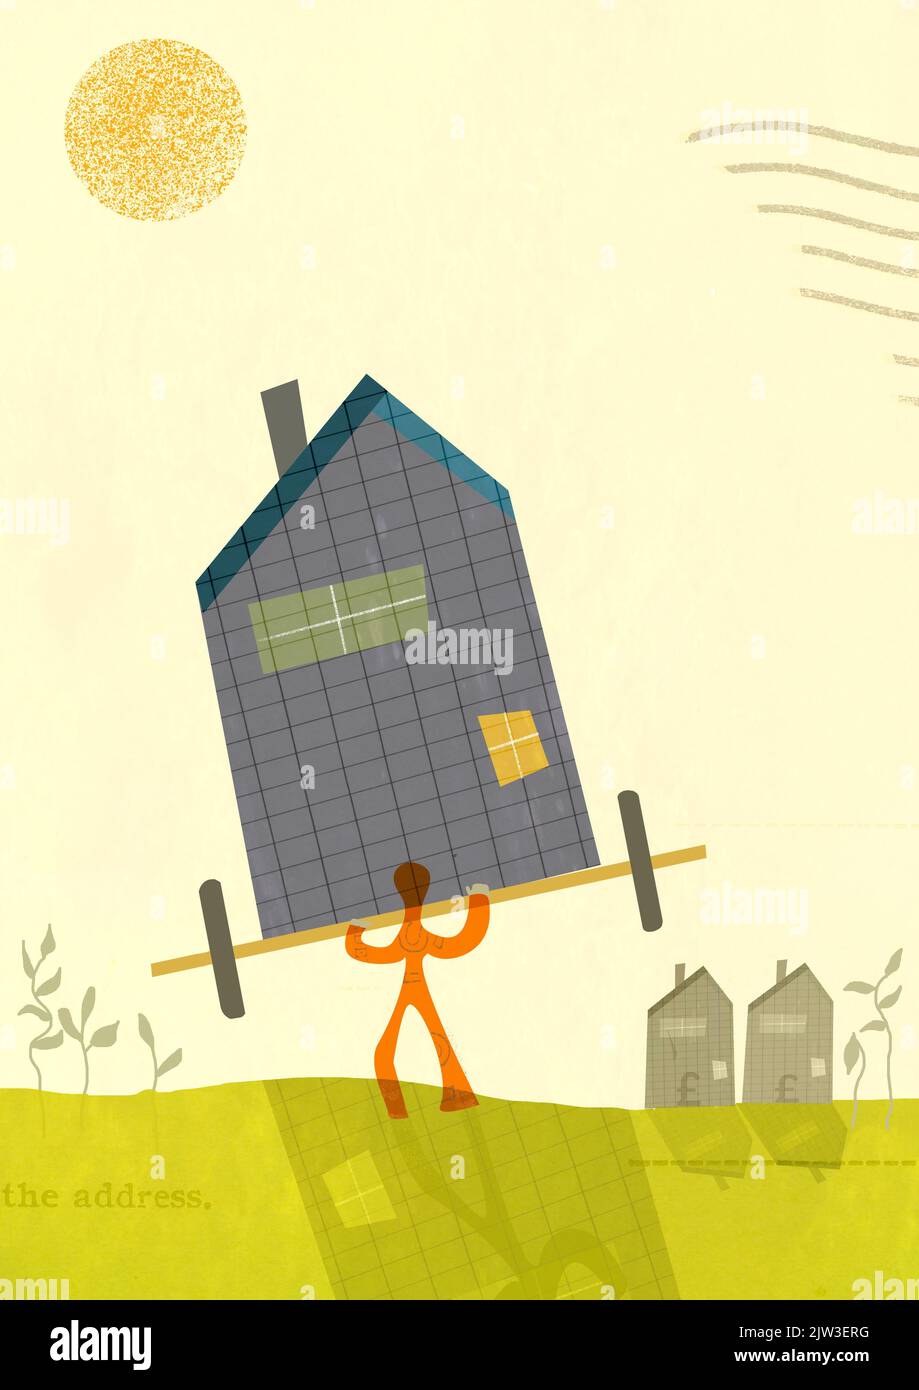 Conceptual Illustration suitable for illustrating the topic of housing - moving house, the burden of home ownership or re-locating. Stock Photo